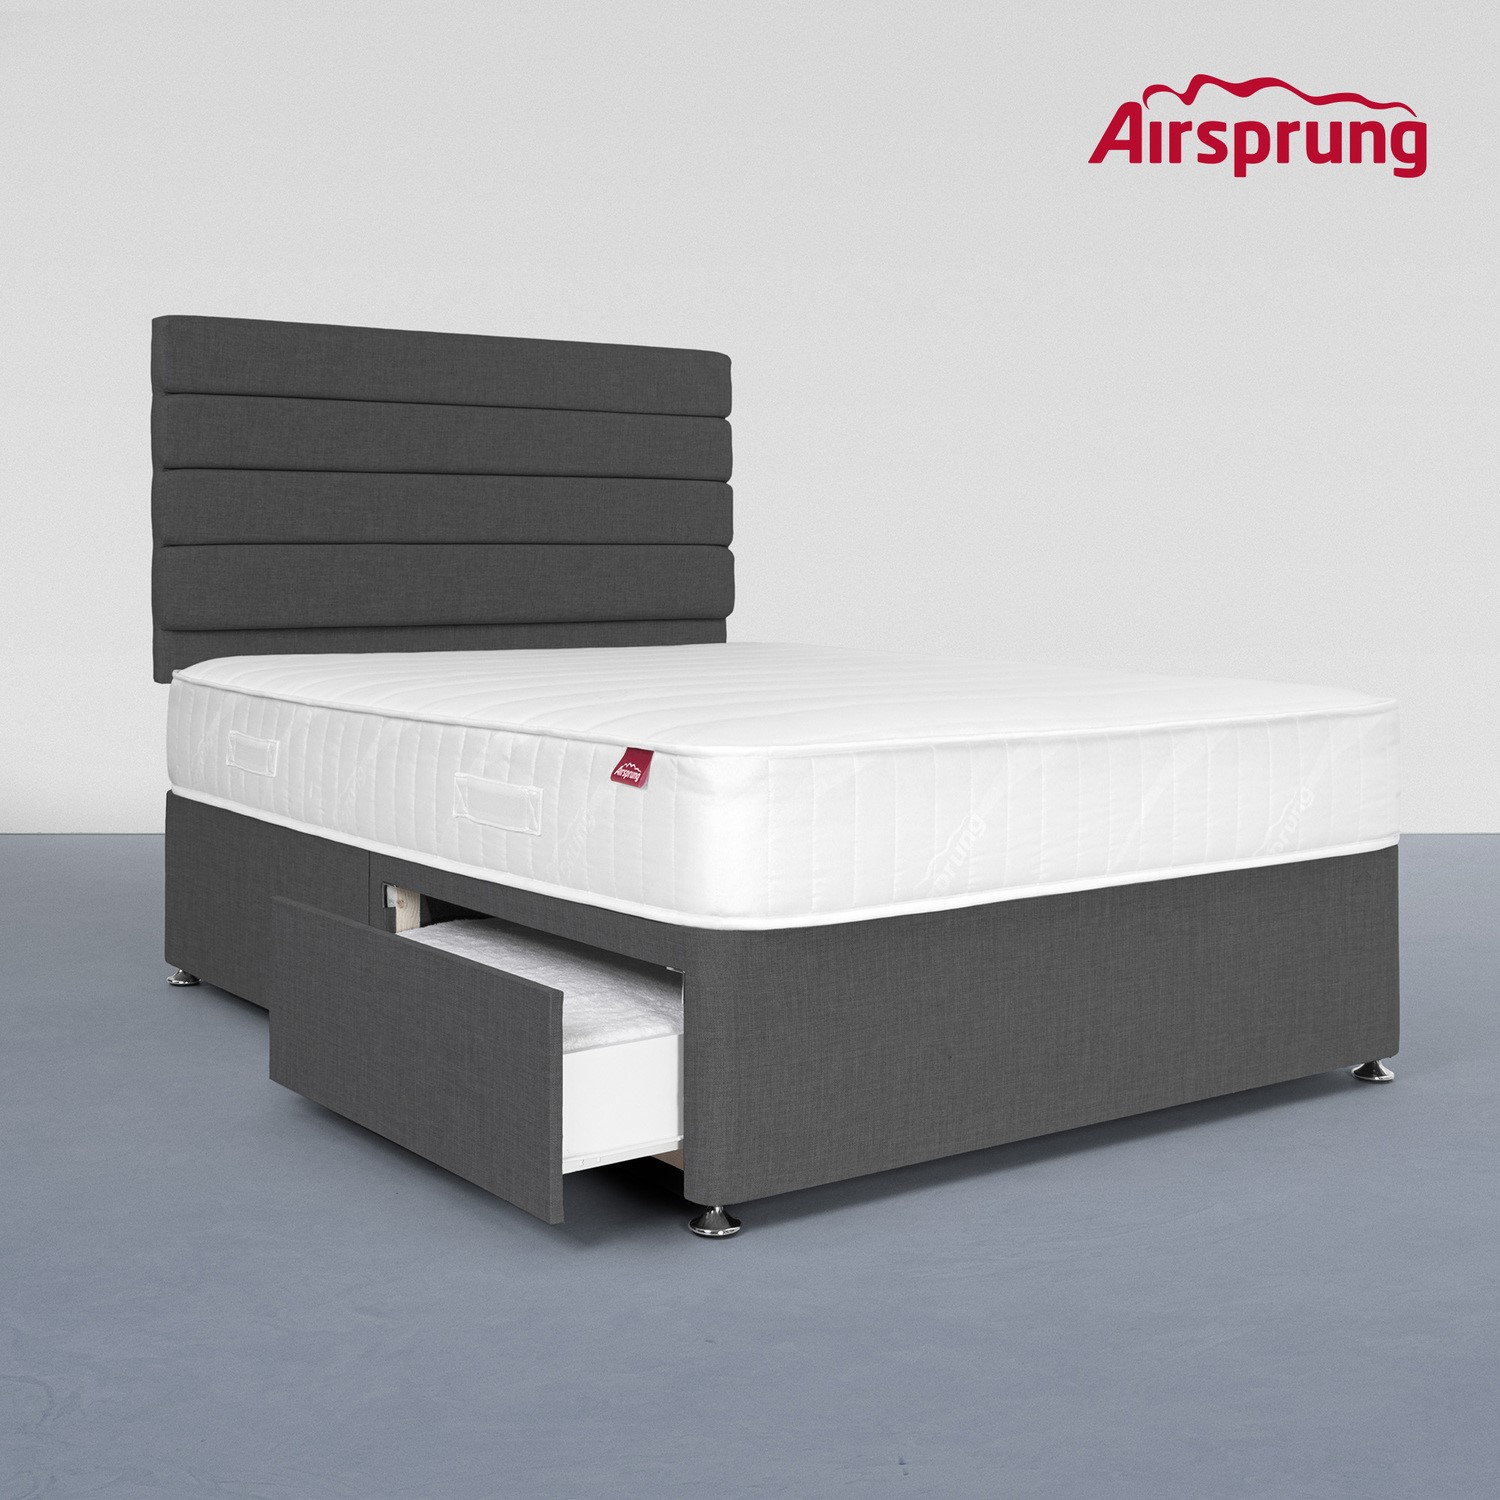 Read more about Airsprung king size 2 drawer divan bed with comfort mattress charcoal